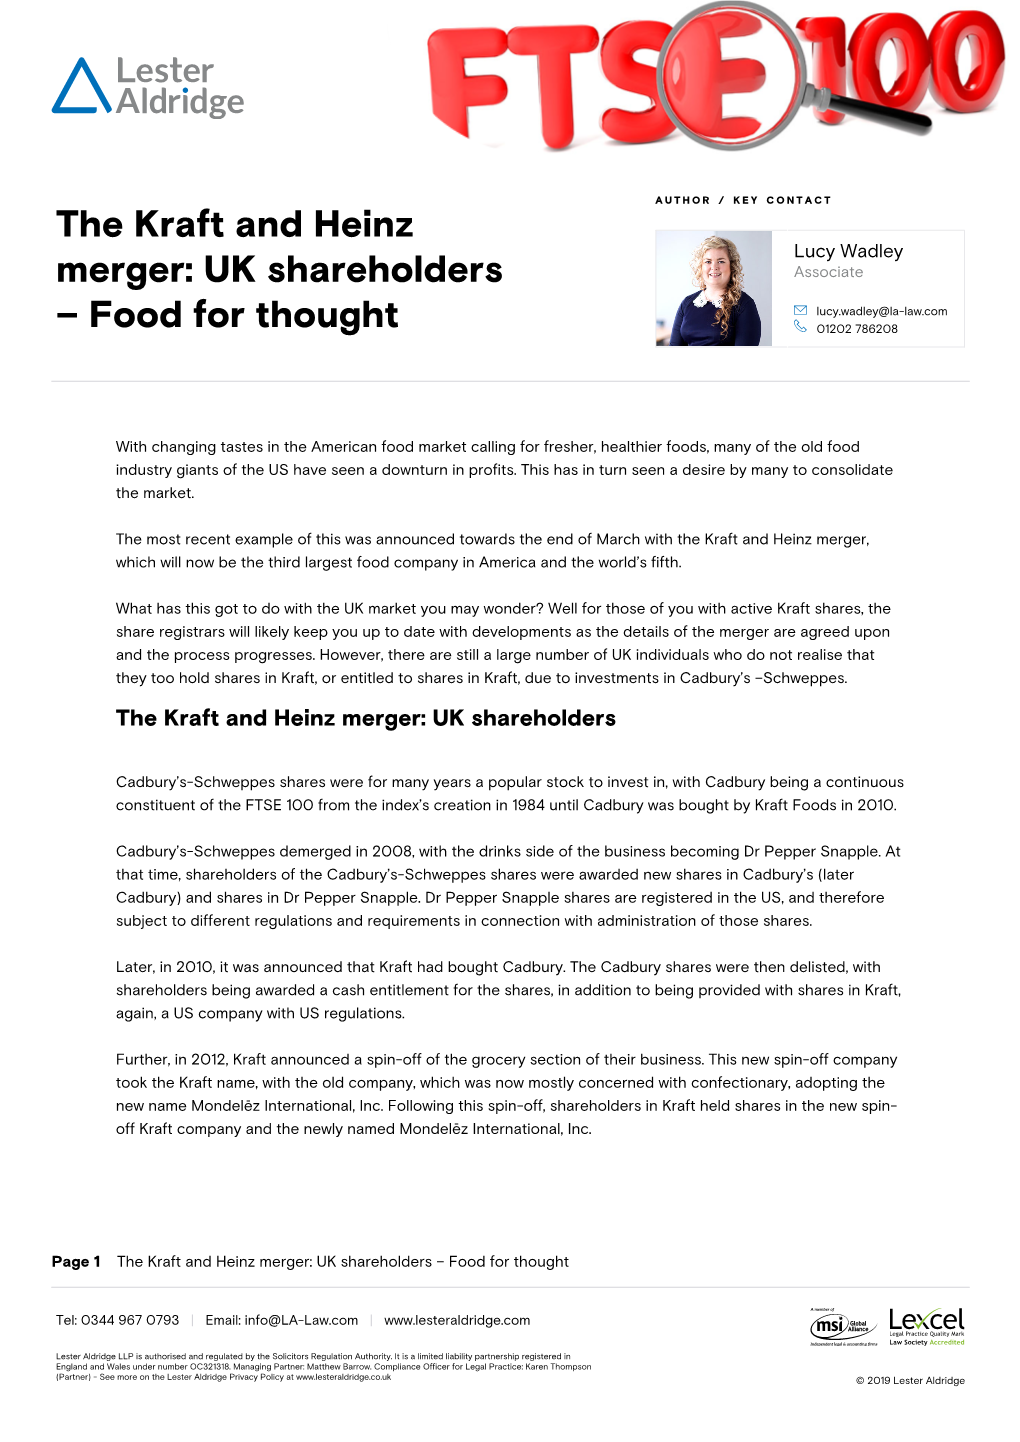 The Kraft and Heinz Merger: UK Shareholders – Food for Thought